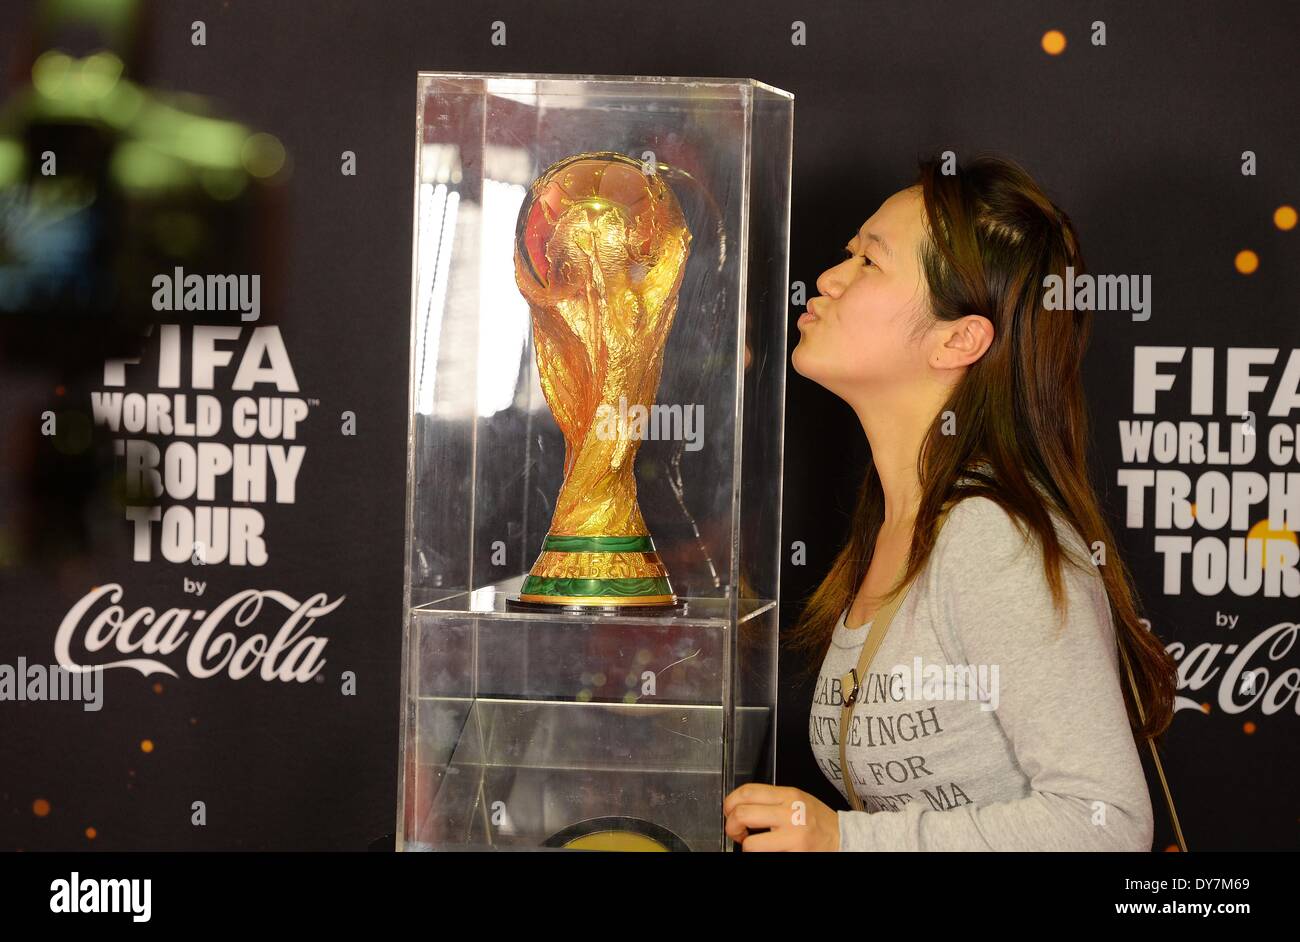 Shanghai. 9th Apr, 2014. A woman poses for a photo with the FIFA World Cup trophy on display in Shanghai, east China, April 9, 2014, as part of its world tour ahead of the Brazil 2014 World Cup finals this summer. © Lai Xinlin/Xinhua/Alamy Live News Stock Photo